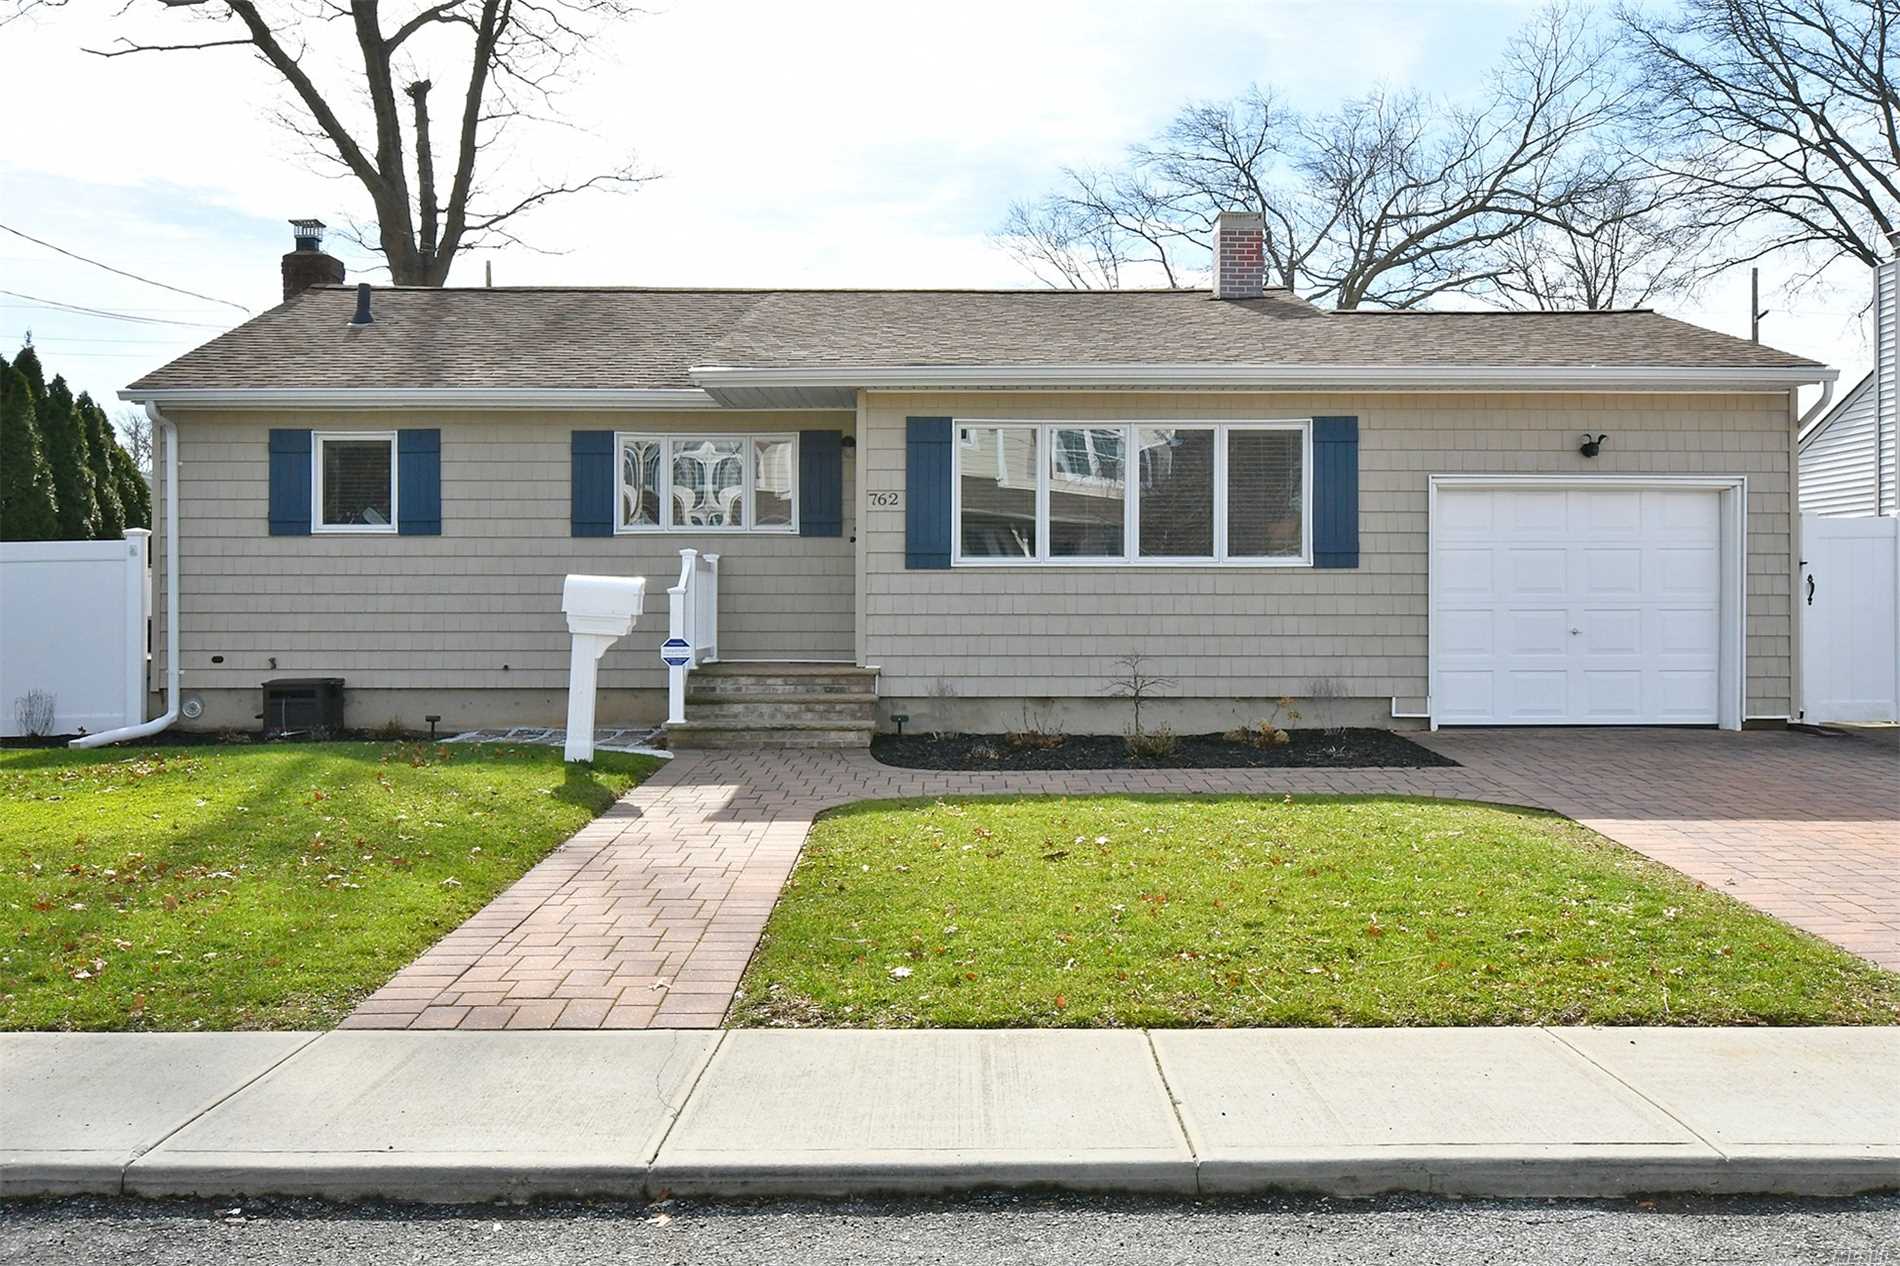 Updated Mint Ranch In Desirable Arnold Estates Section! 3 Beds, Updated Bathroom, Eat In Kitchen, Wood Floors Throughout, Fireplace, Full Basement, Ose, Gas Cooking & Heating. Don&rsquo;t Miss This Gem Won&rsquo;t Last!